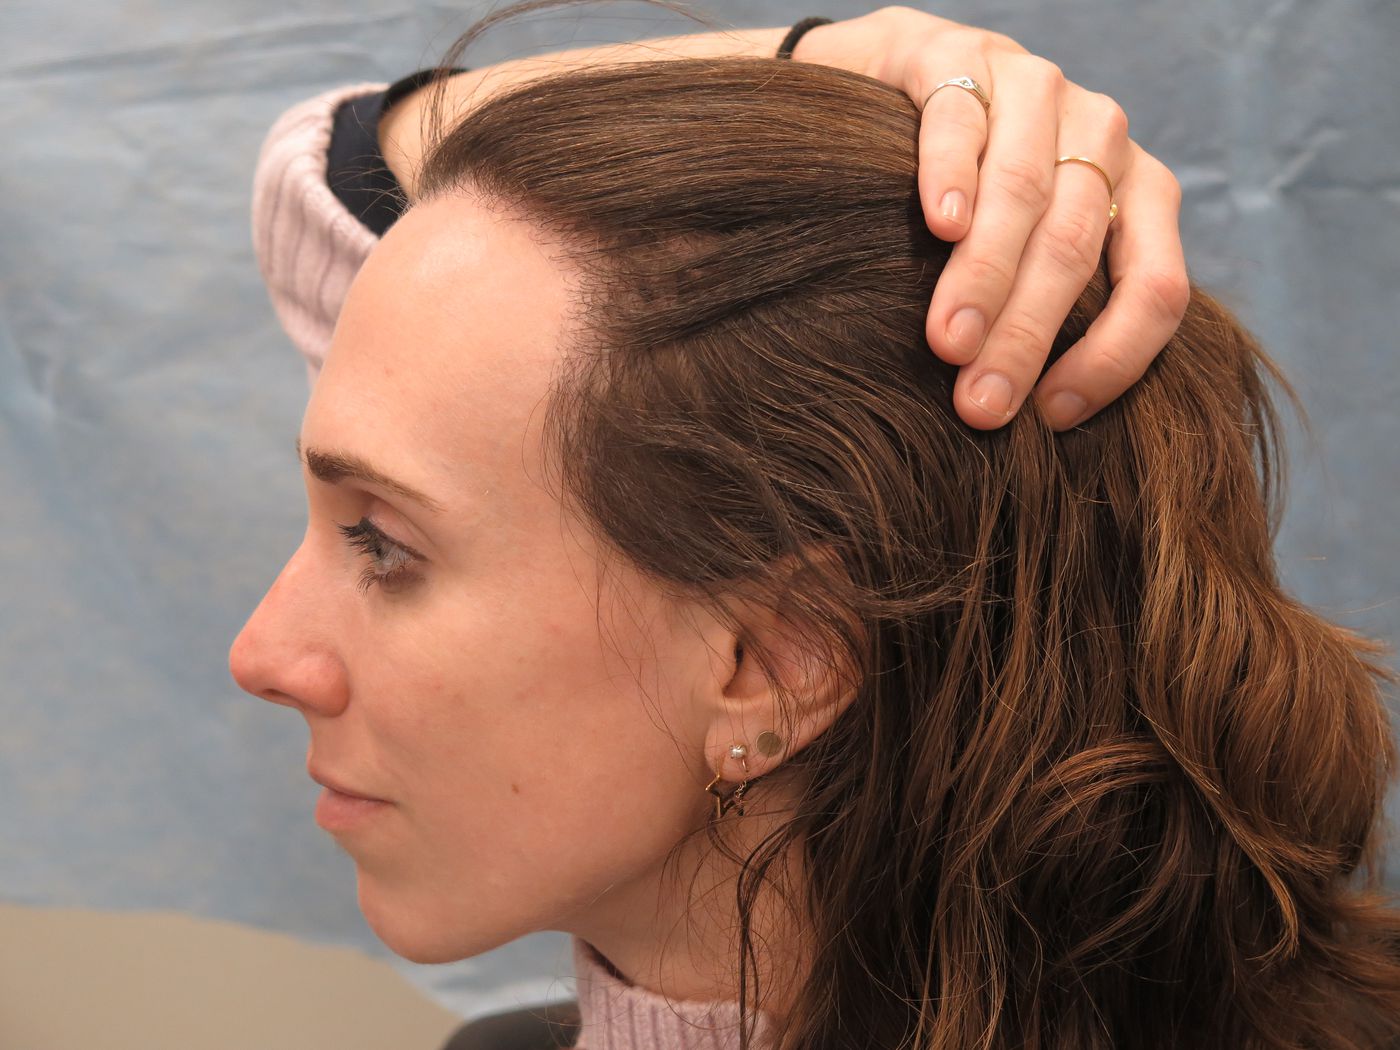 Receding Hairline in Women Signs, Causes, Reversal Surgery, Hair